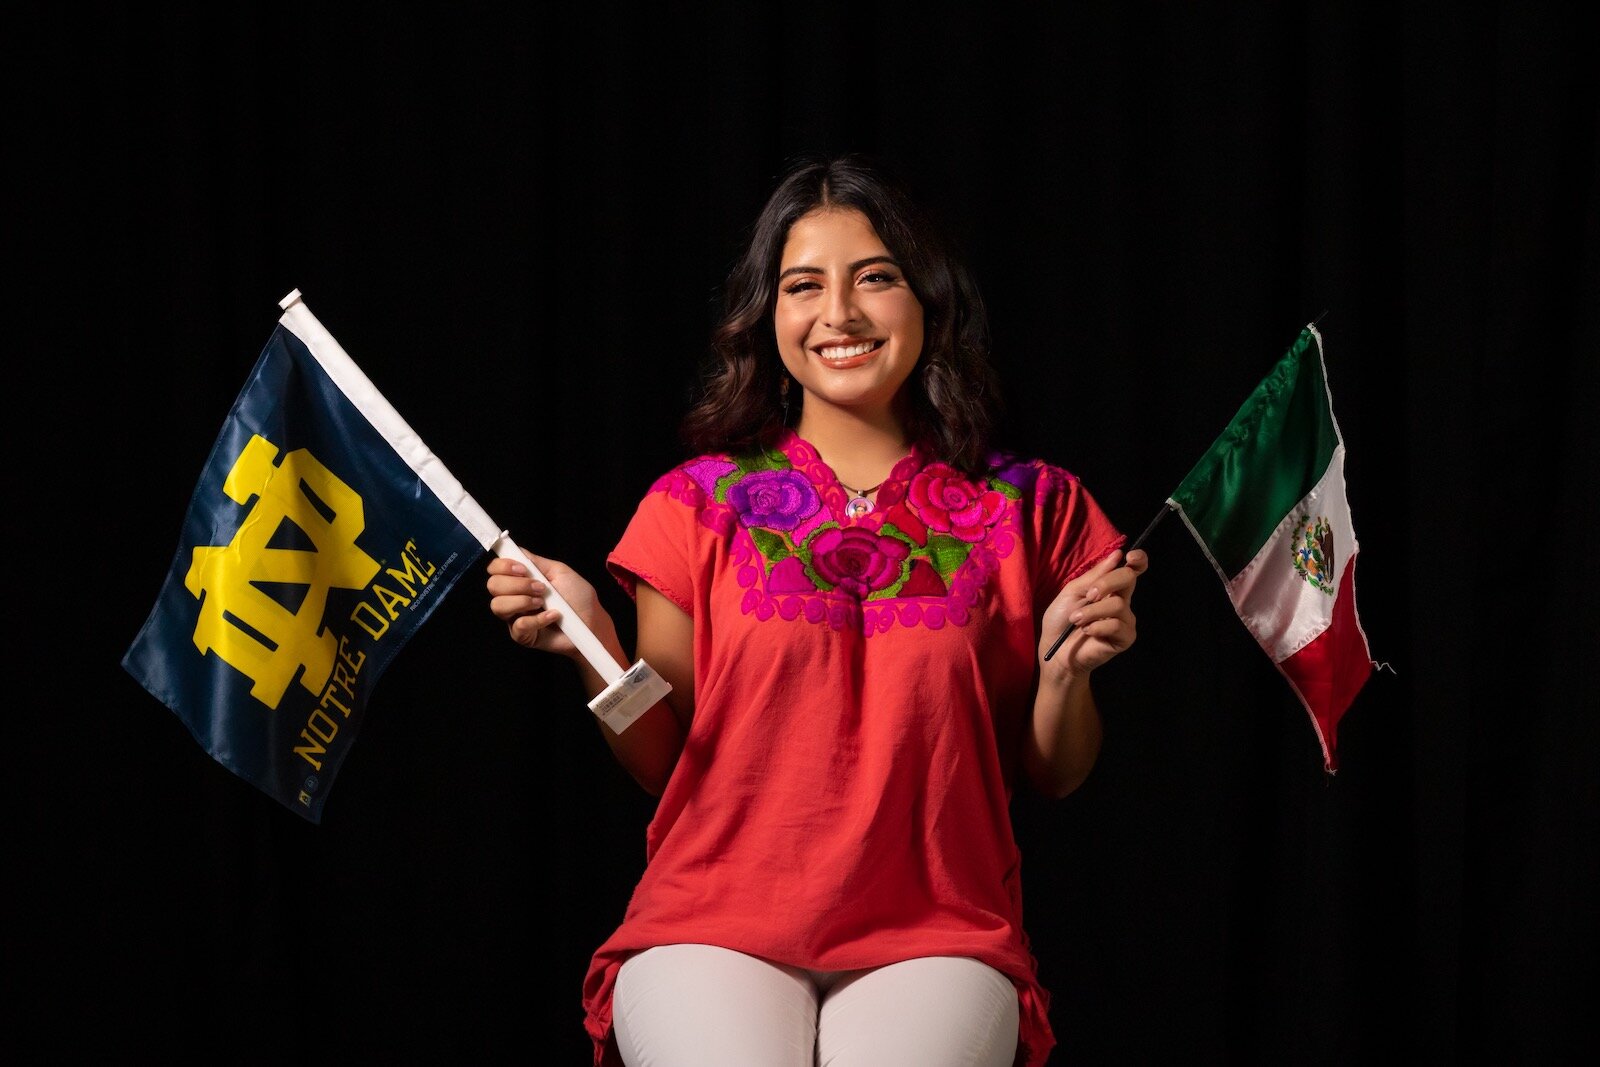 Irasema Hernandez Trujillo and her family immigrated to the U.S. from a small town in Mexico.